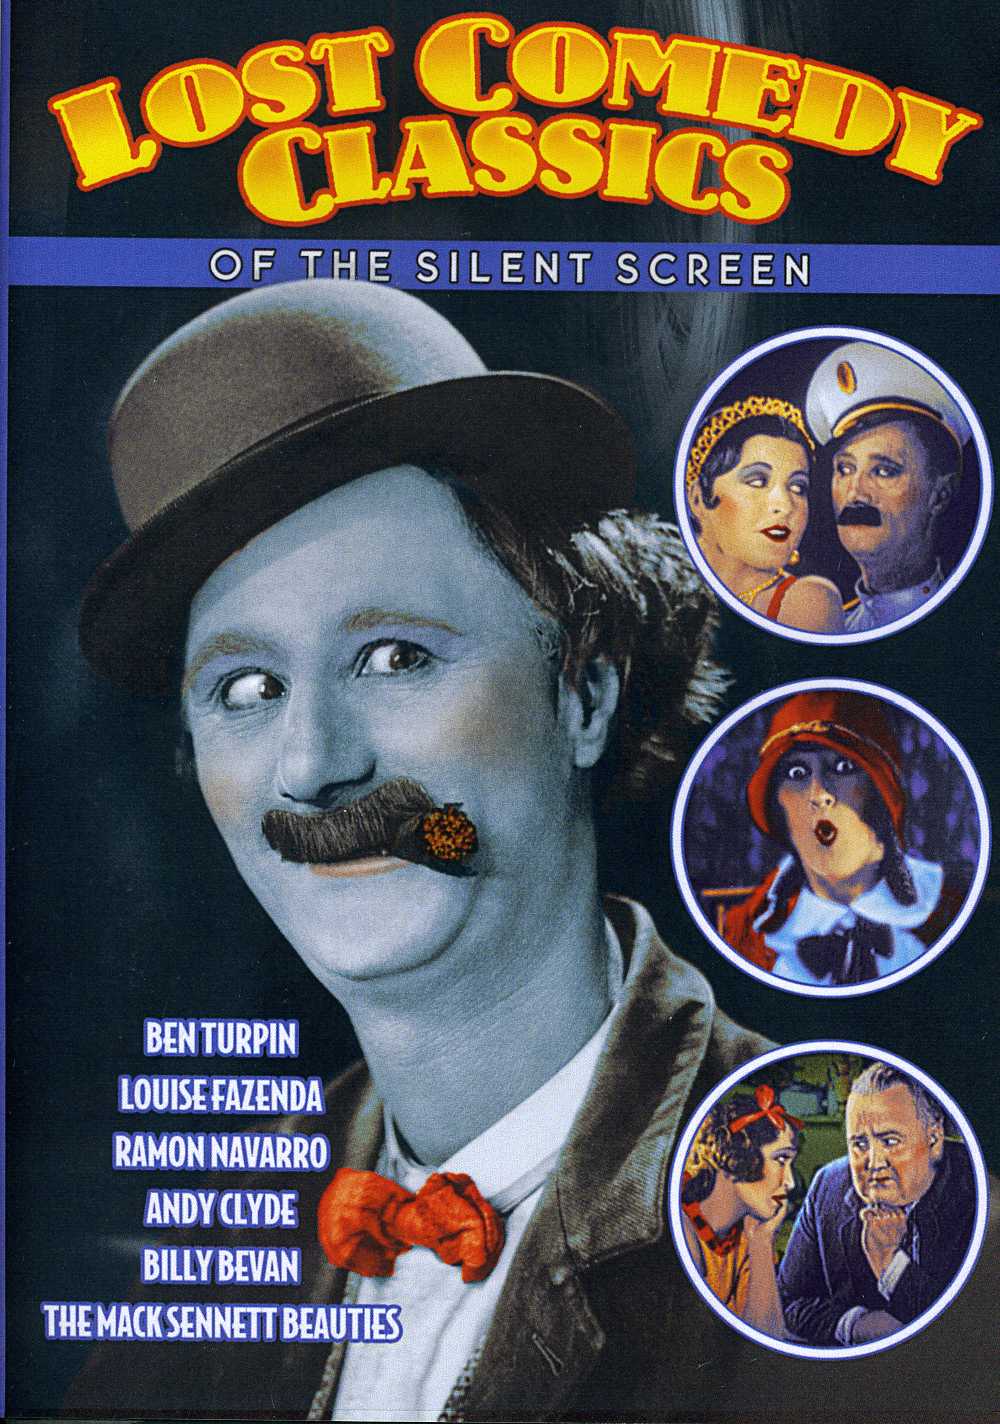 LOST COMEDY CLASSICS OF THE SILENT SCREEN (SILENT)